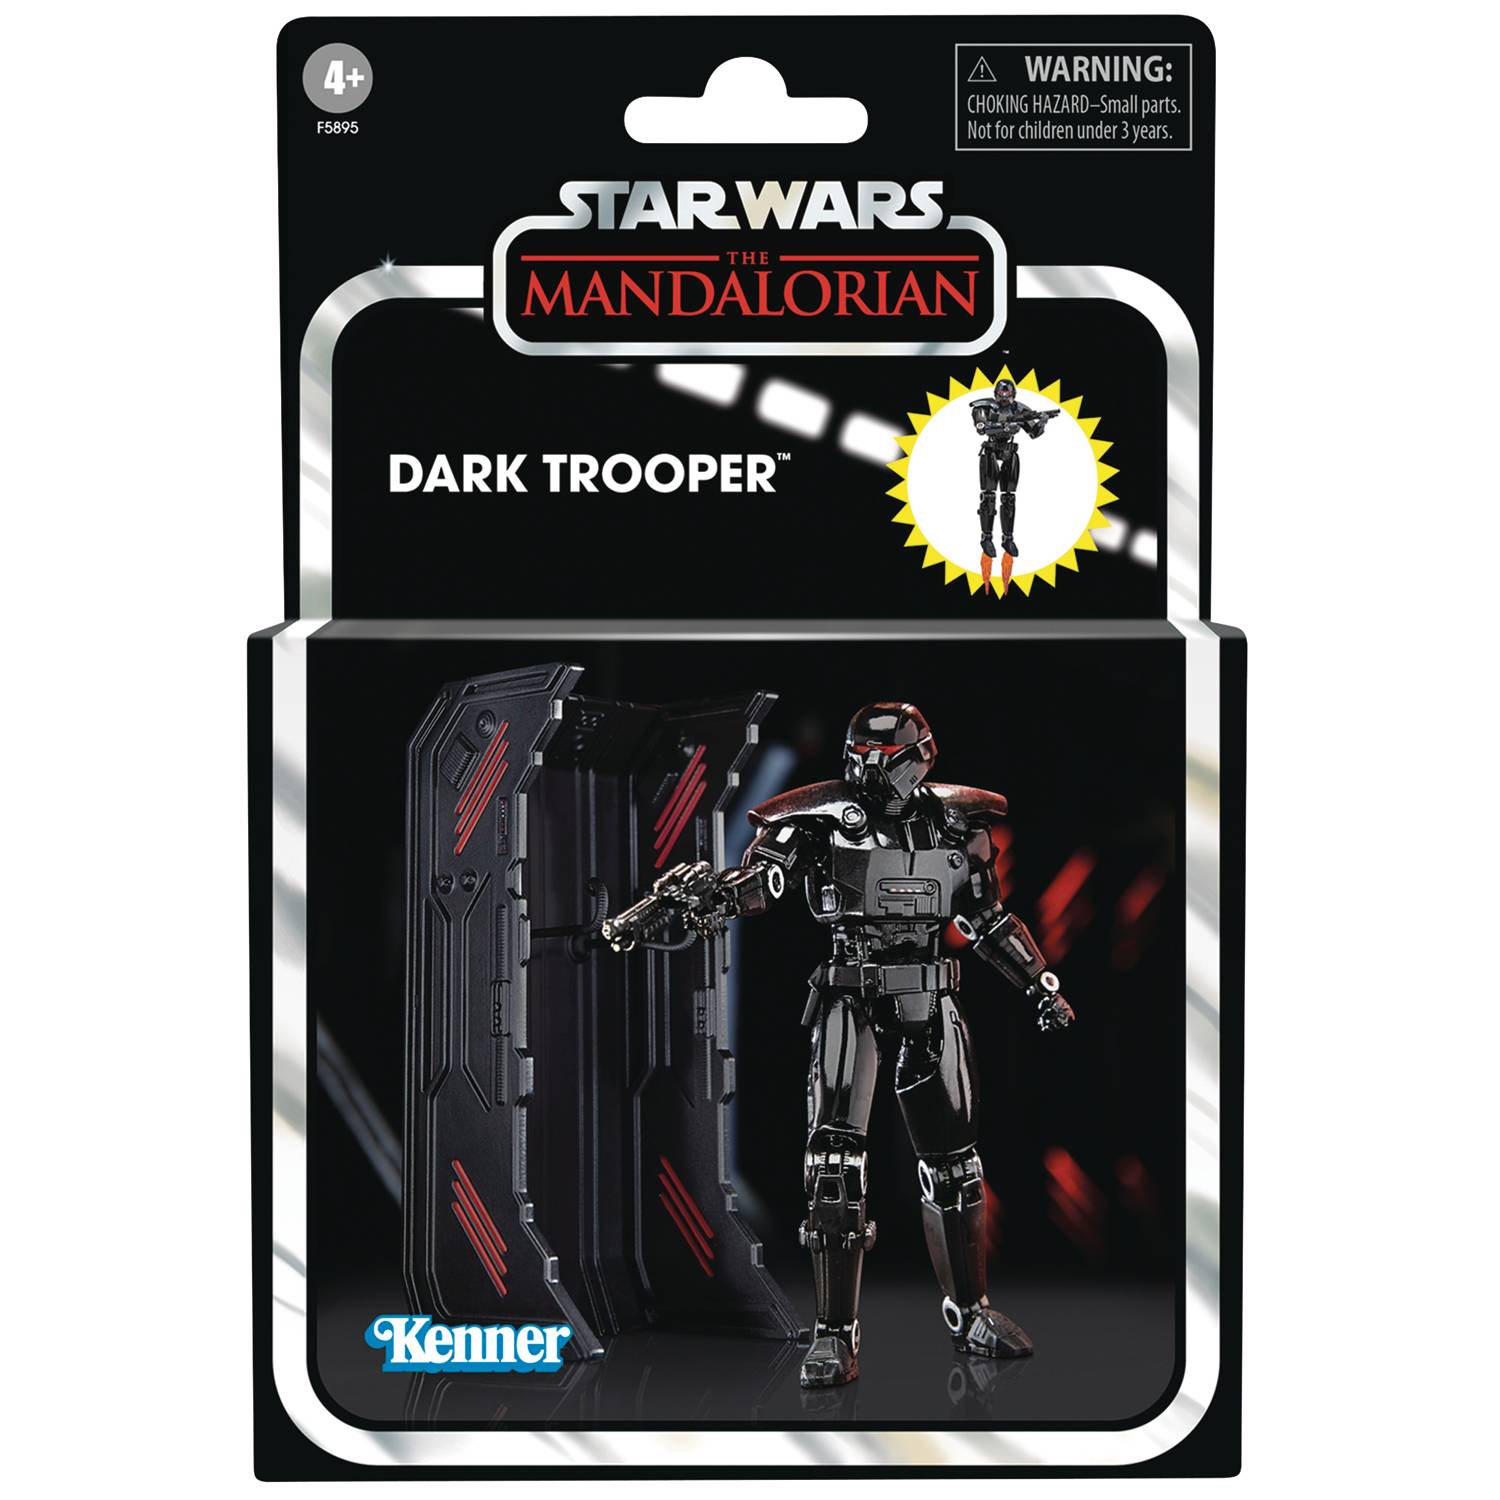 Star Wars - The Vintage Collection - The Mandalorian - Dark Trooper 3.75inch Action Figure